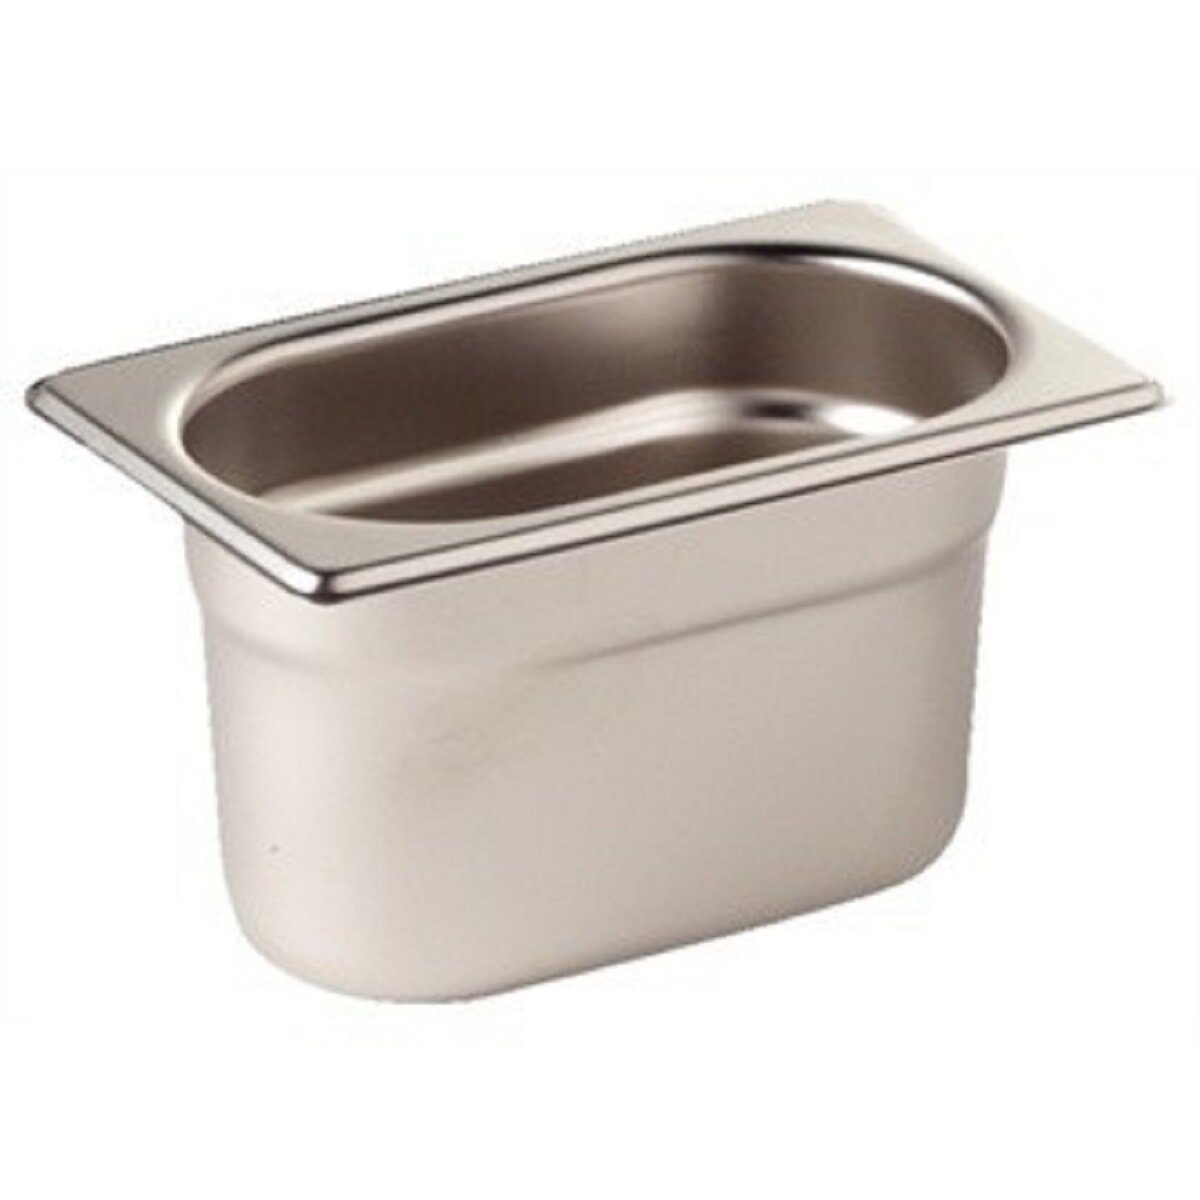 301052 - Stainless Steel Gastronorm Pan GN 1/9 Depth 65mm (1 box/48 units)